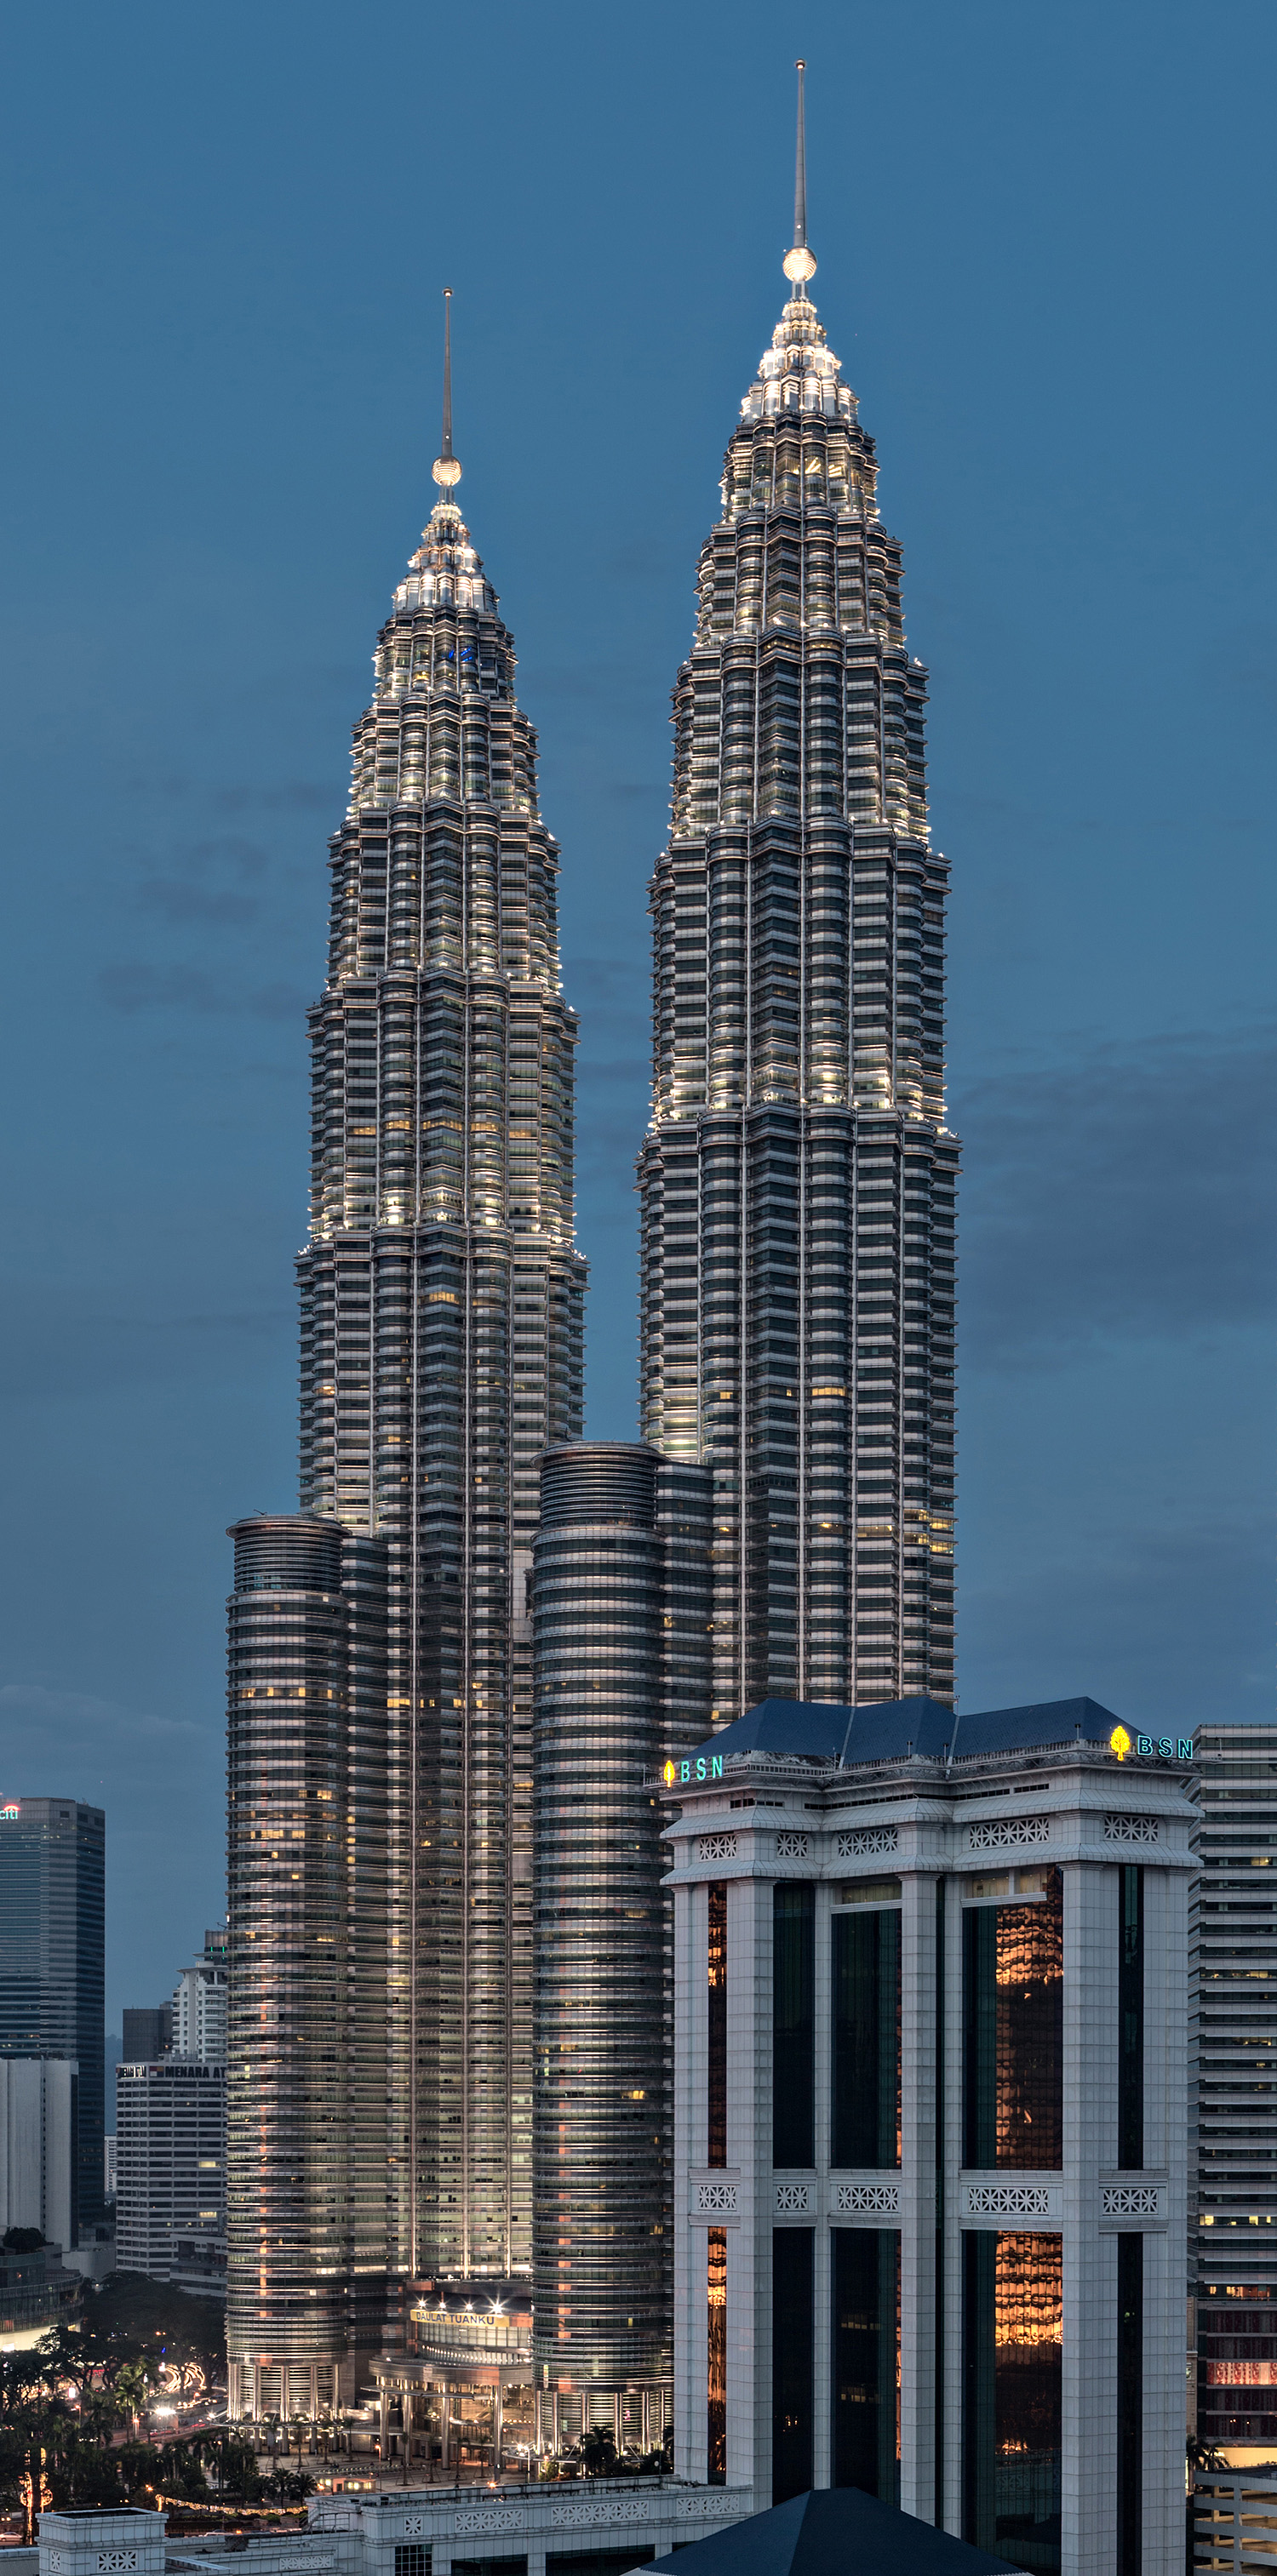 Petronas Twin Tower 1, Kuala Lumpur - View from Renaissance Hotel, Tower 1 is the right tower. © Mathias Beinling